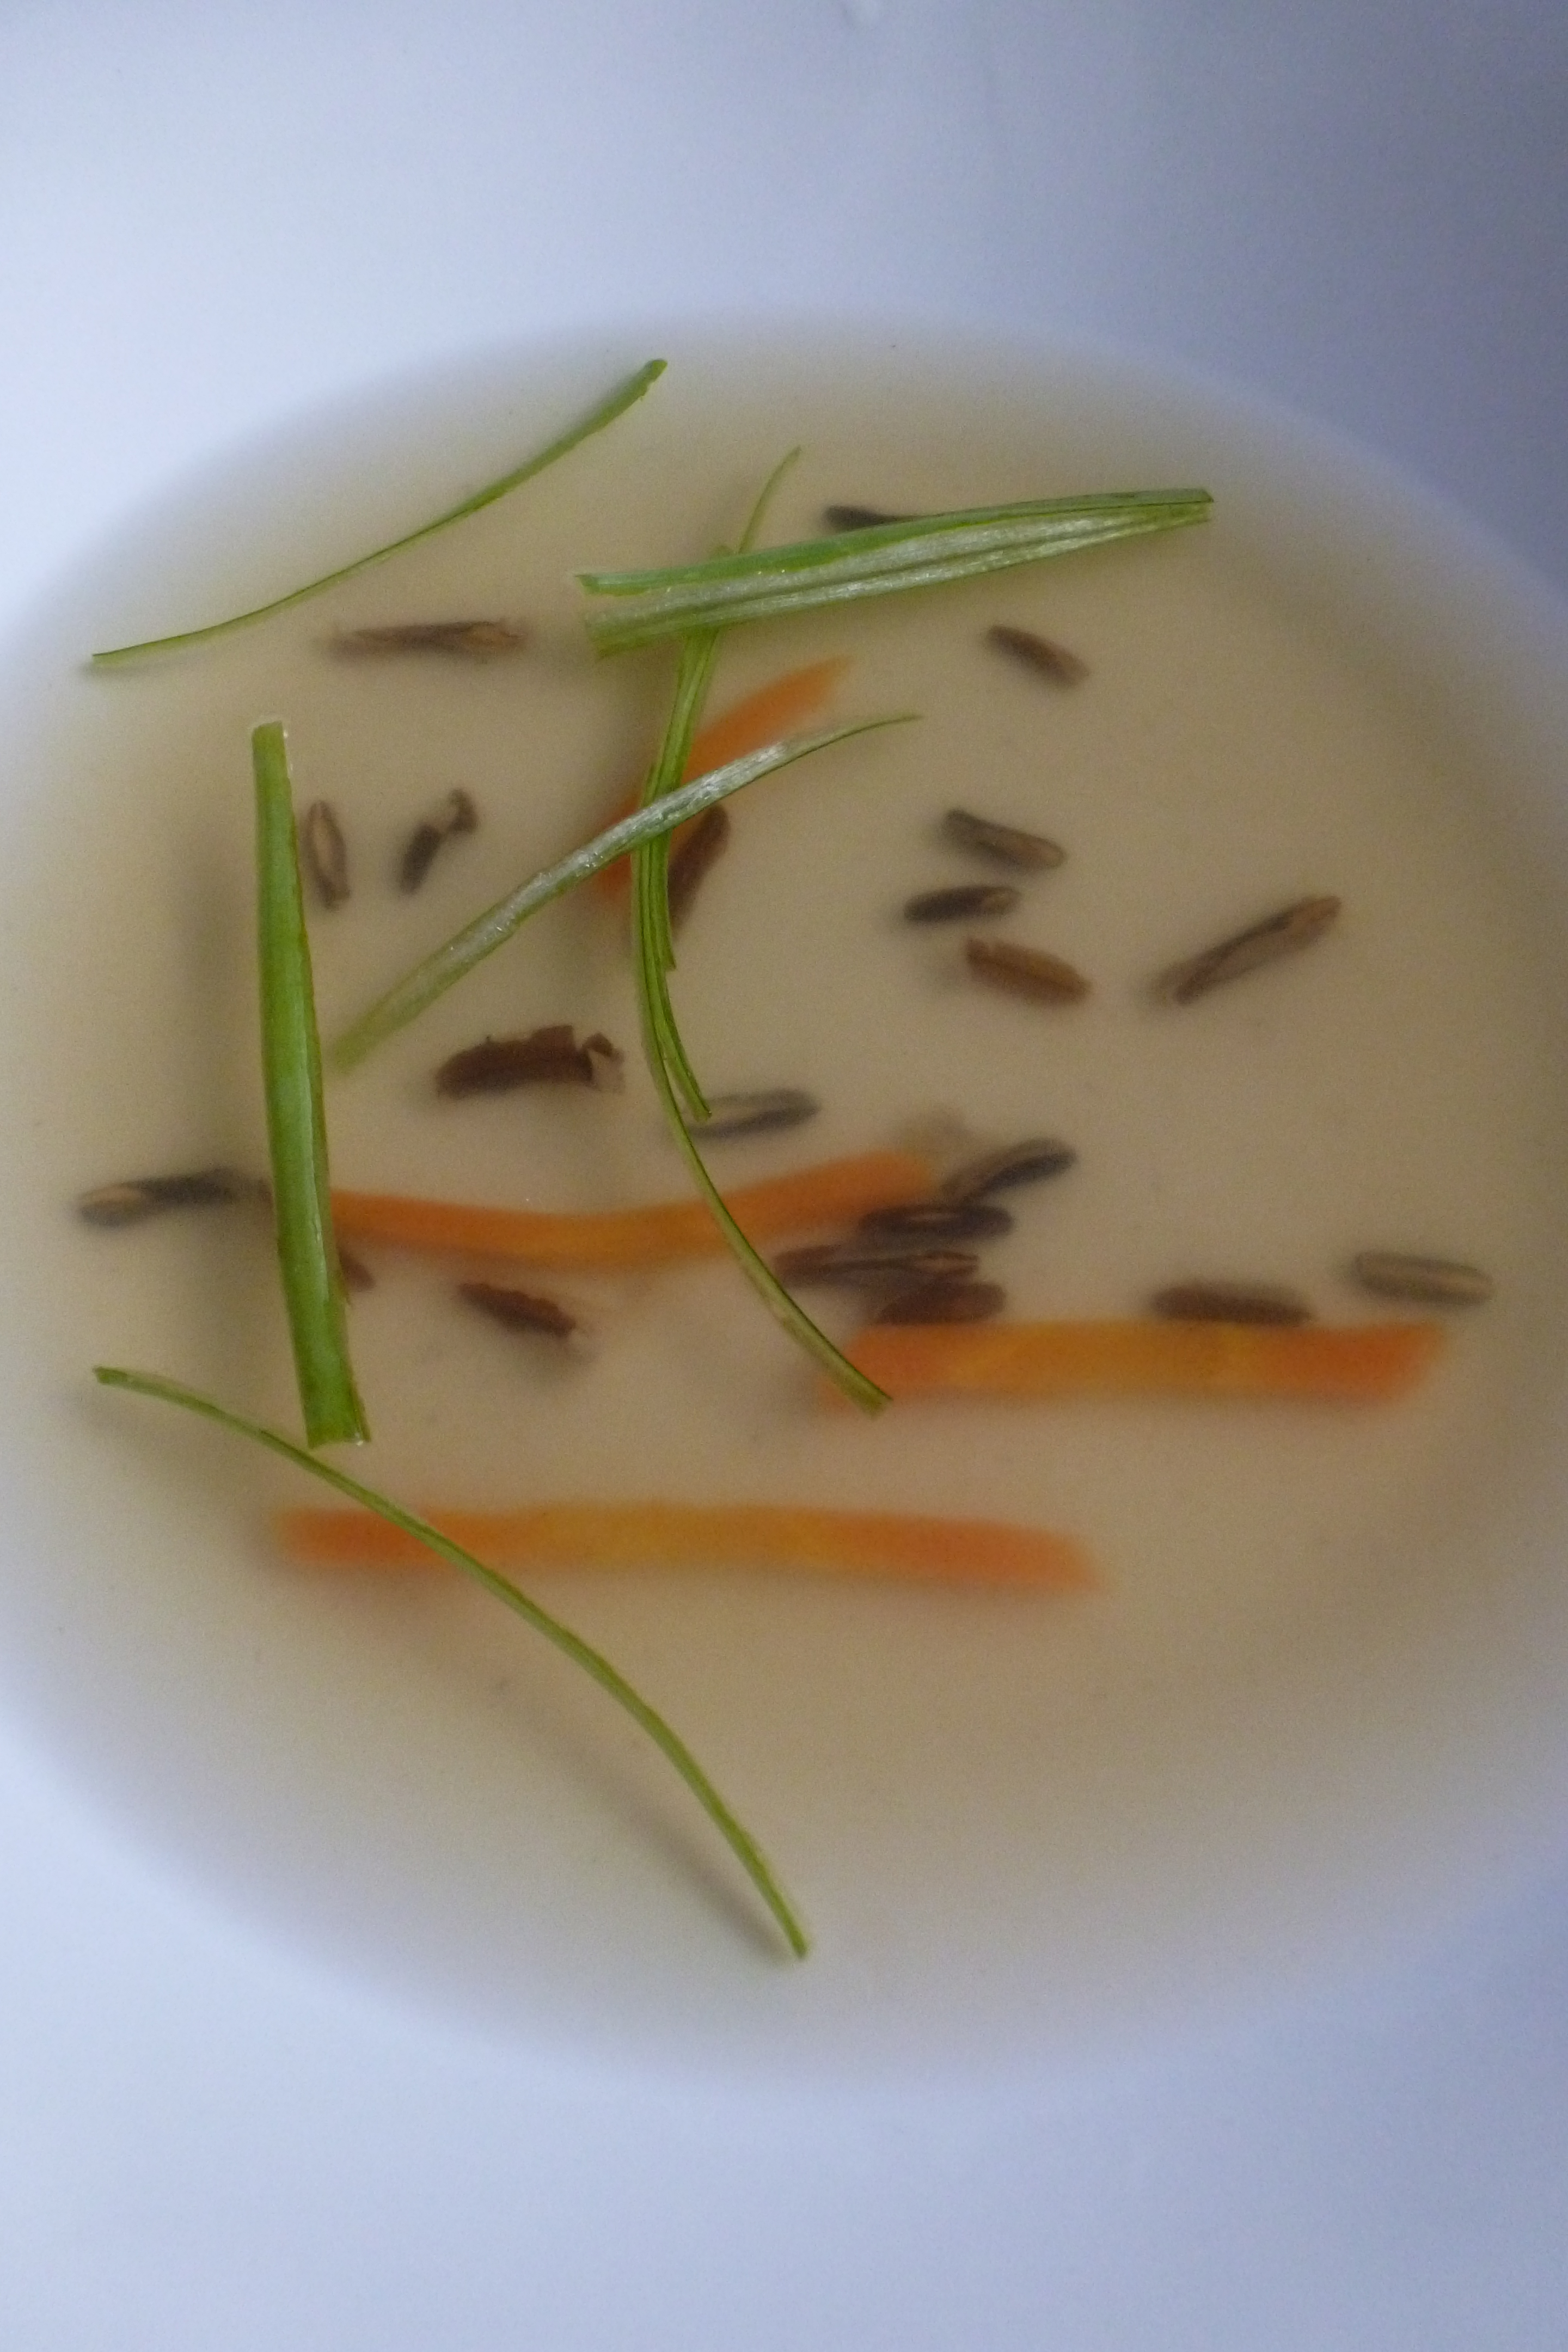 Wild rice broth with carrots and green onions